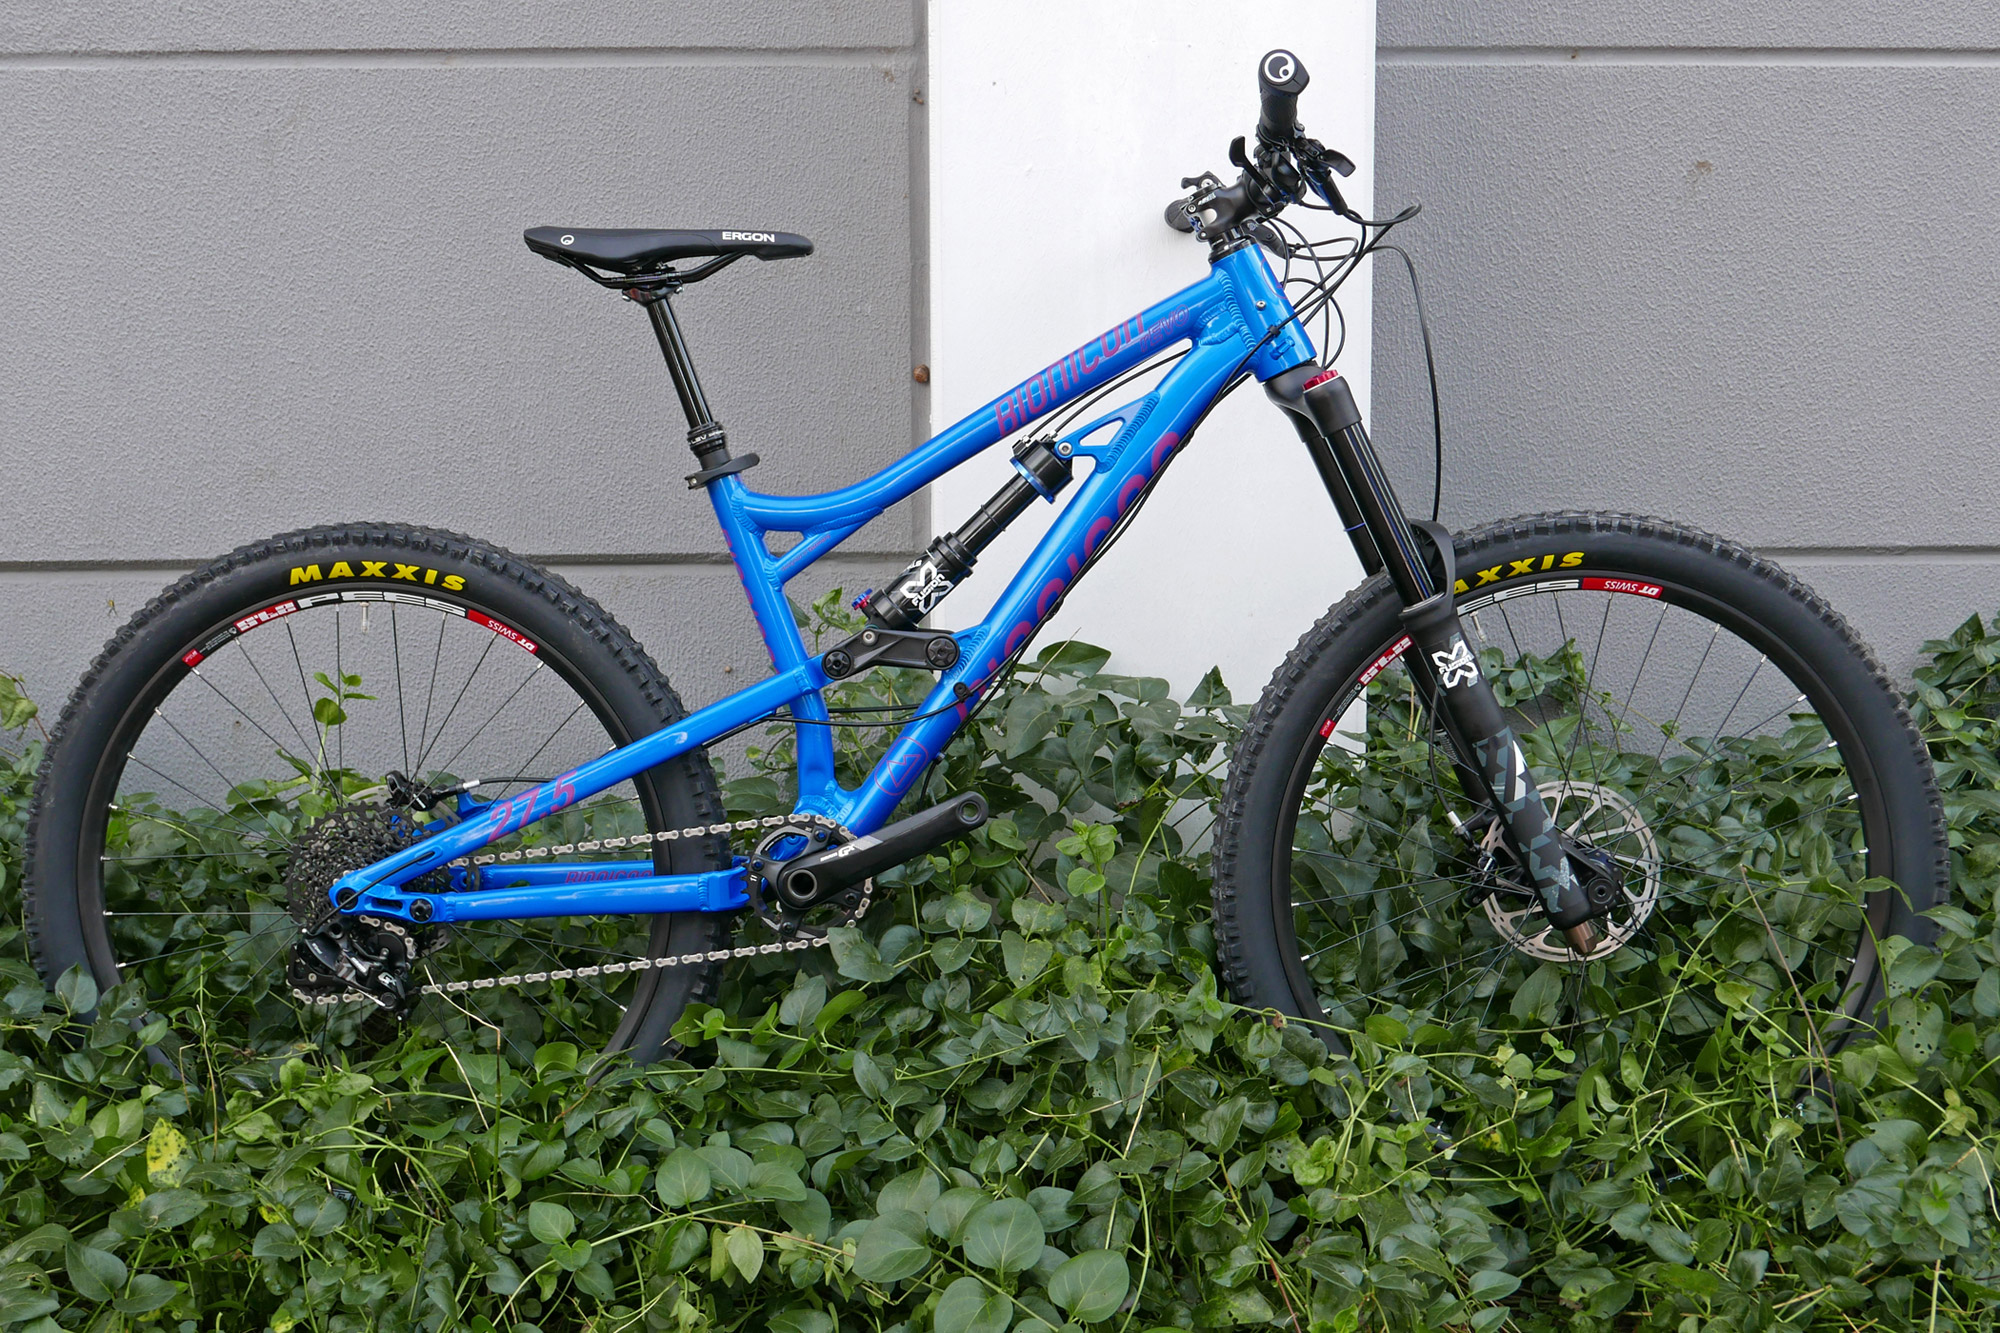 EB16: Bionicon rEVO simplifies naming with updated geometry; plus new 3ngine 275+ eMTB